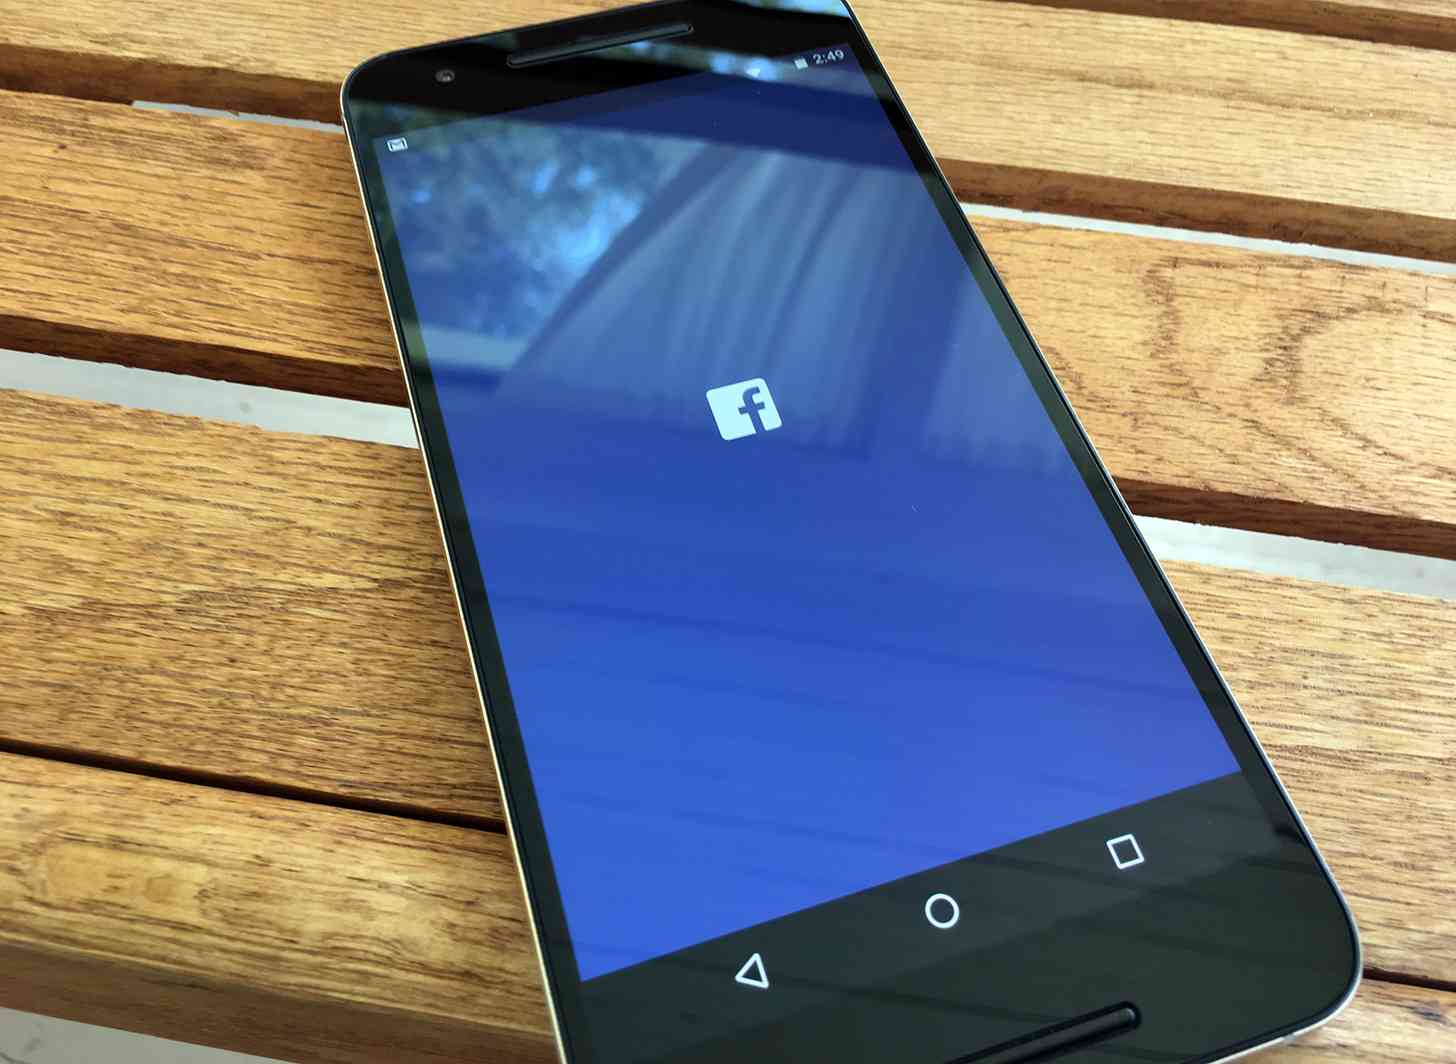 Facebook app Android